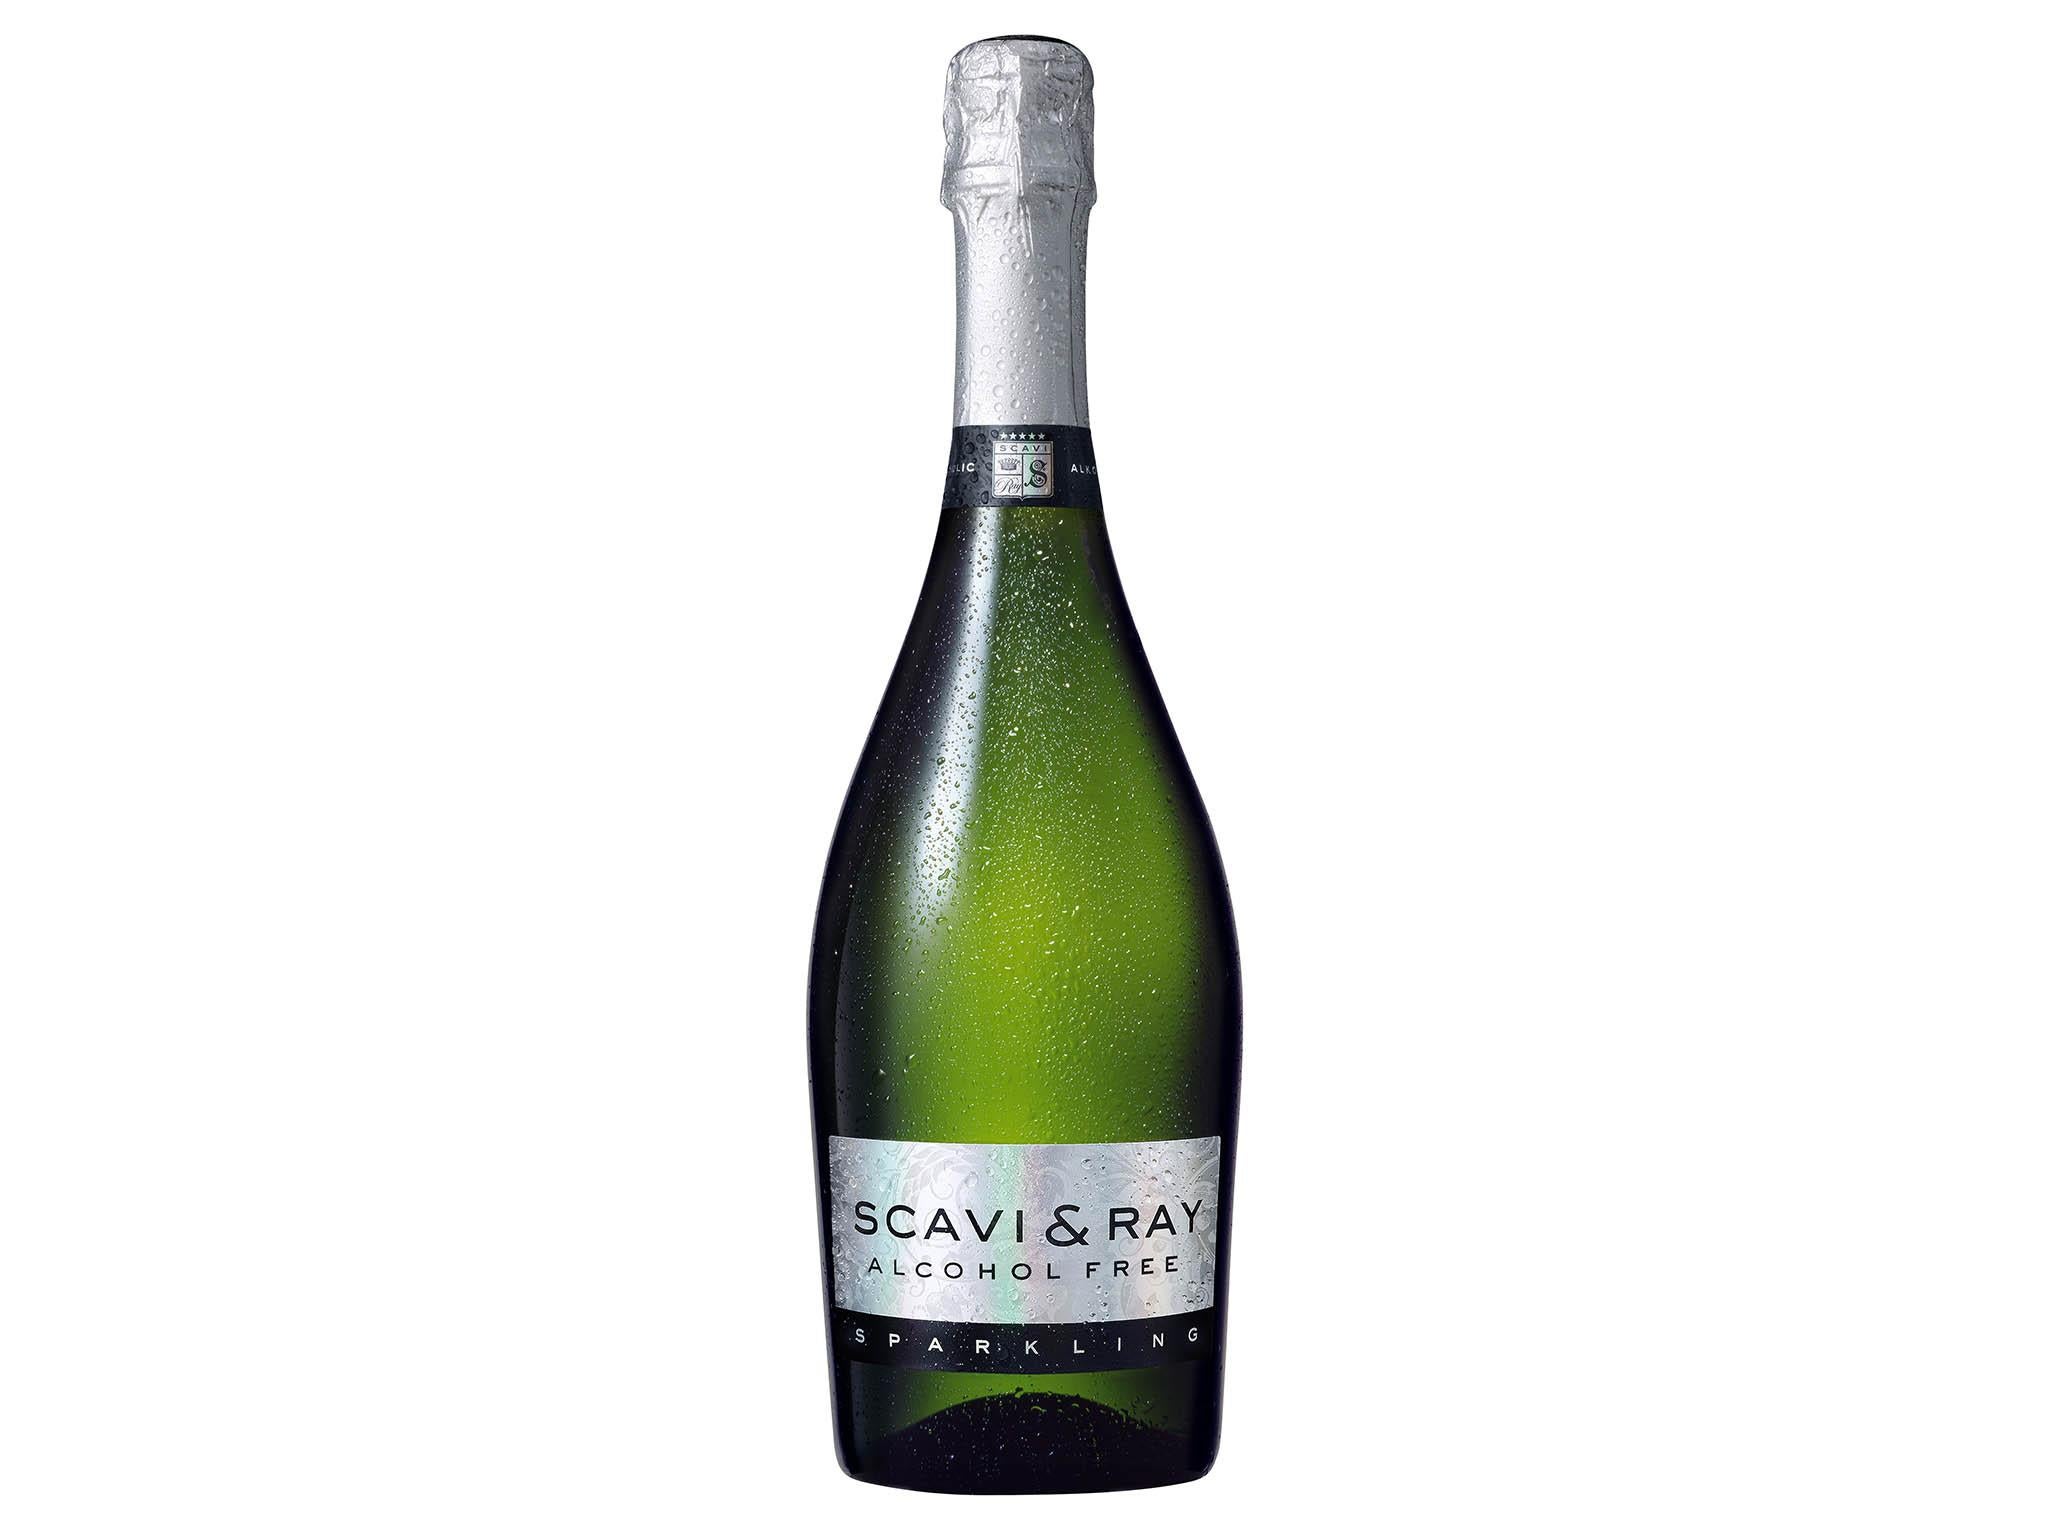 Get your bubbly fix with this sparkling wine